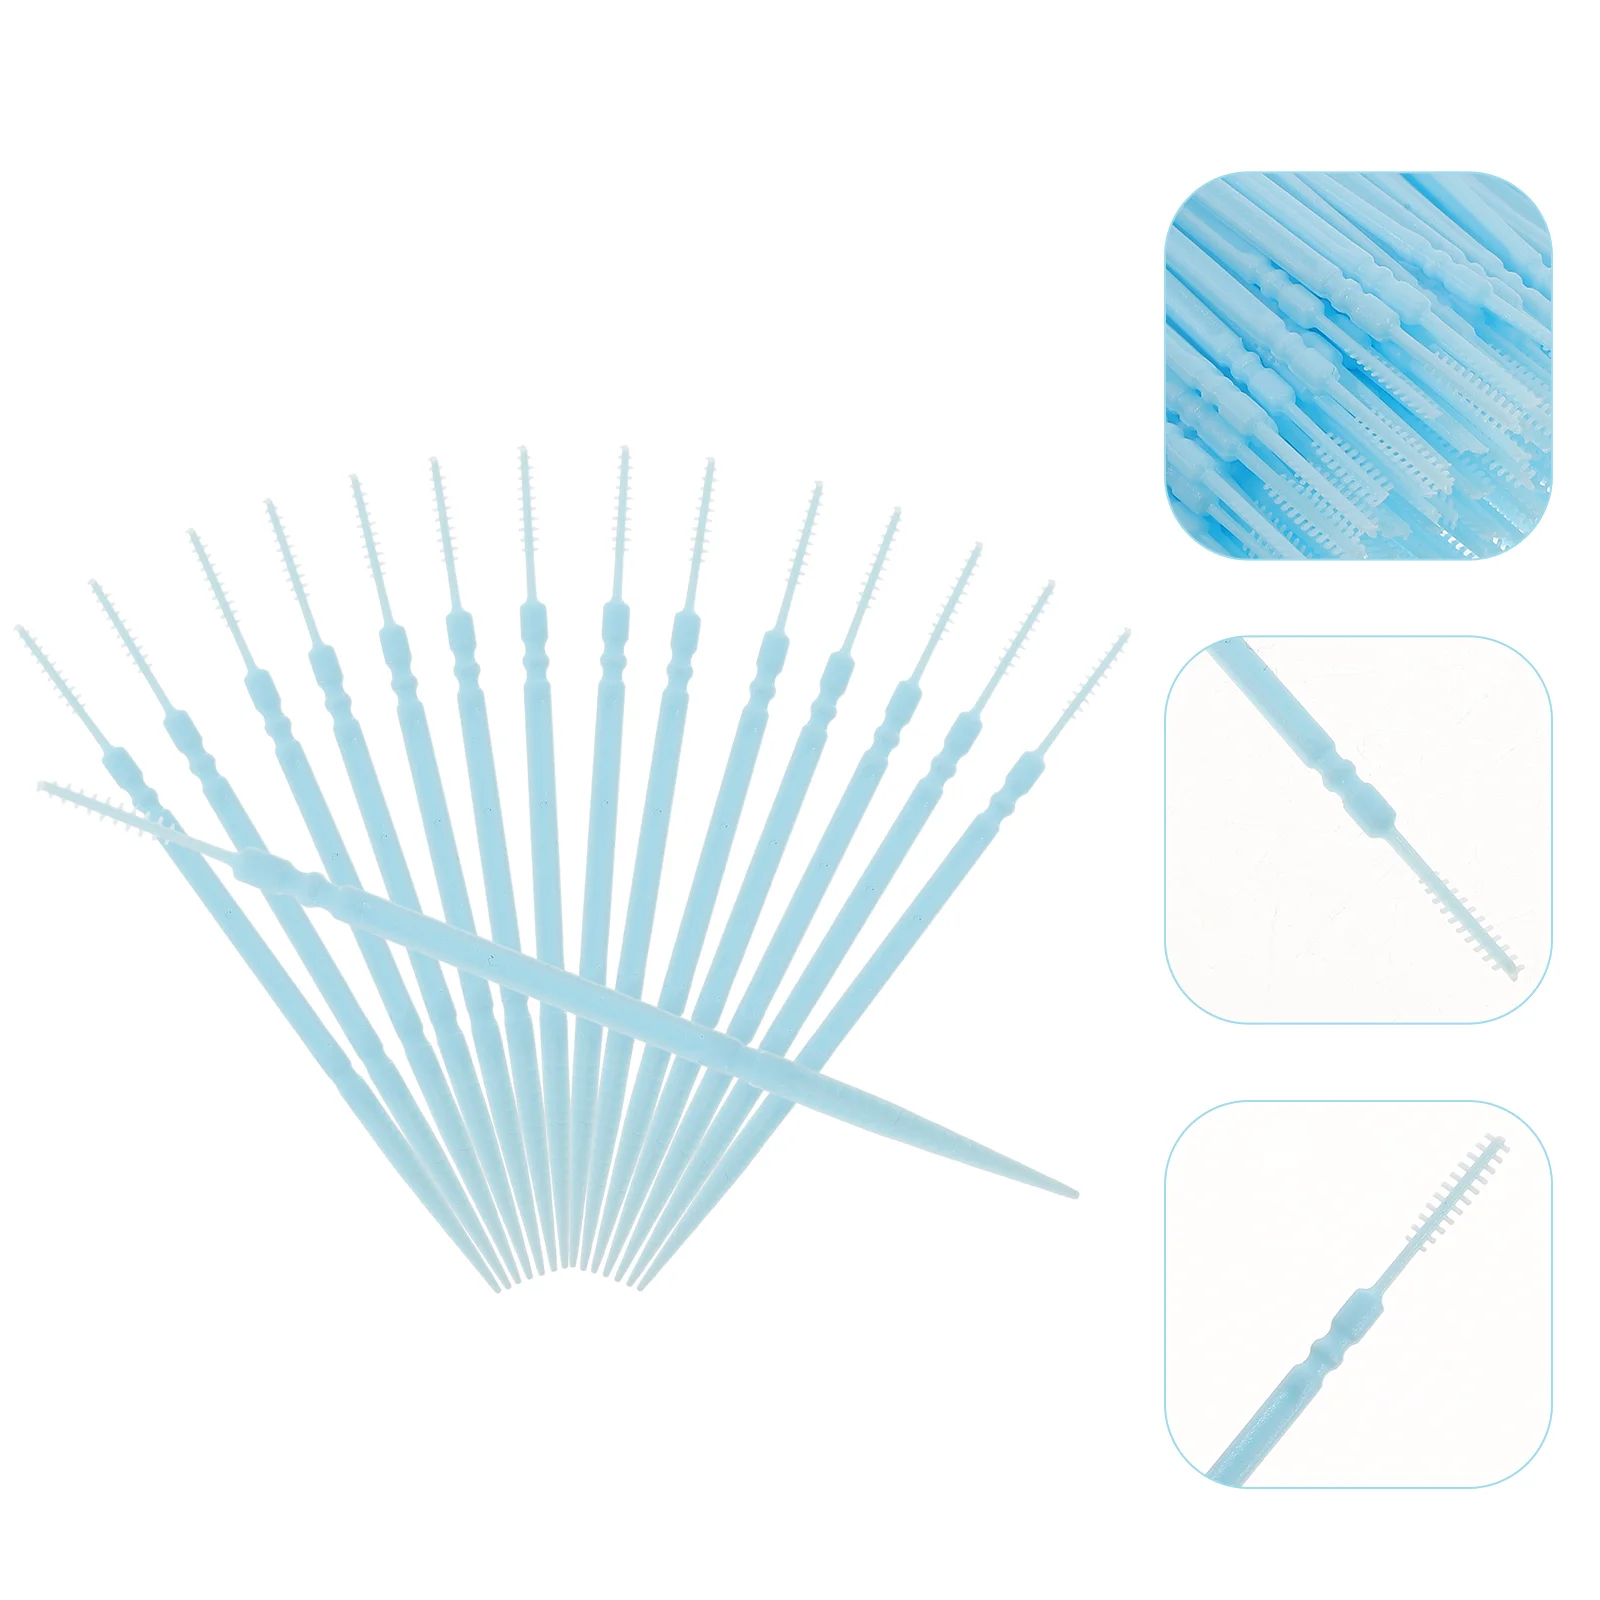 

1100pcs Double-ended Environmental Plastic Toothpicks Disposable Teeth Sticks Dental Oral Care Tooth Sticks (White) For